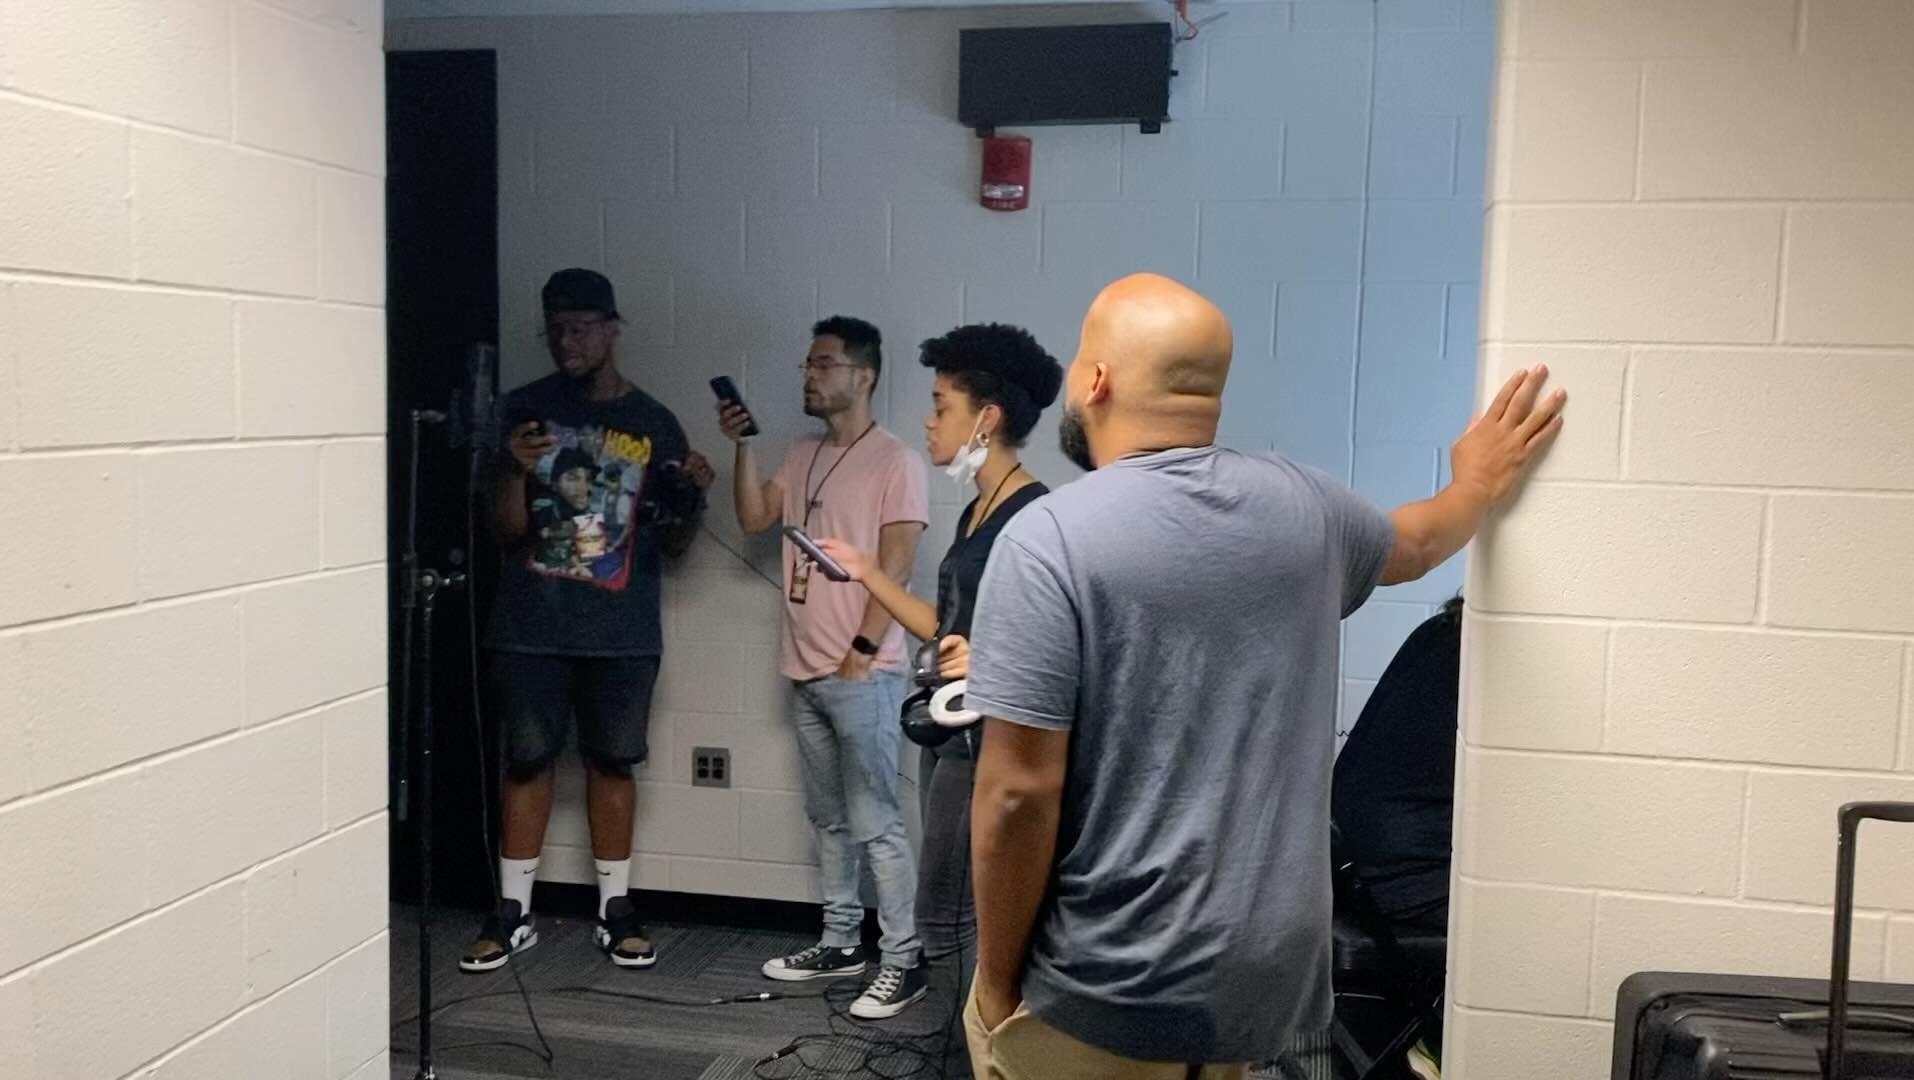 My friend and producer Kyle Williams sent me this over the weekend.  @gabepatillo and @iamterrian singing the backgrounds of See Me Through It while they were on tour with @tobymac a few years ago.  I had no idea no idea Gabe was singing on there and